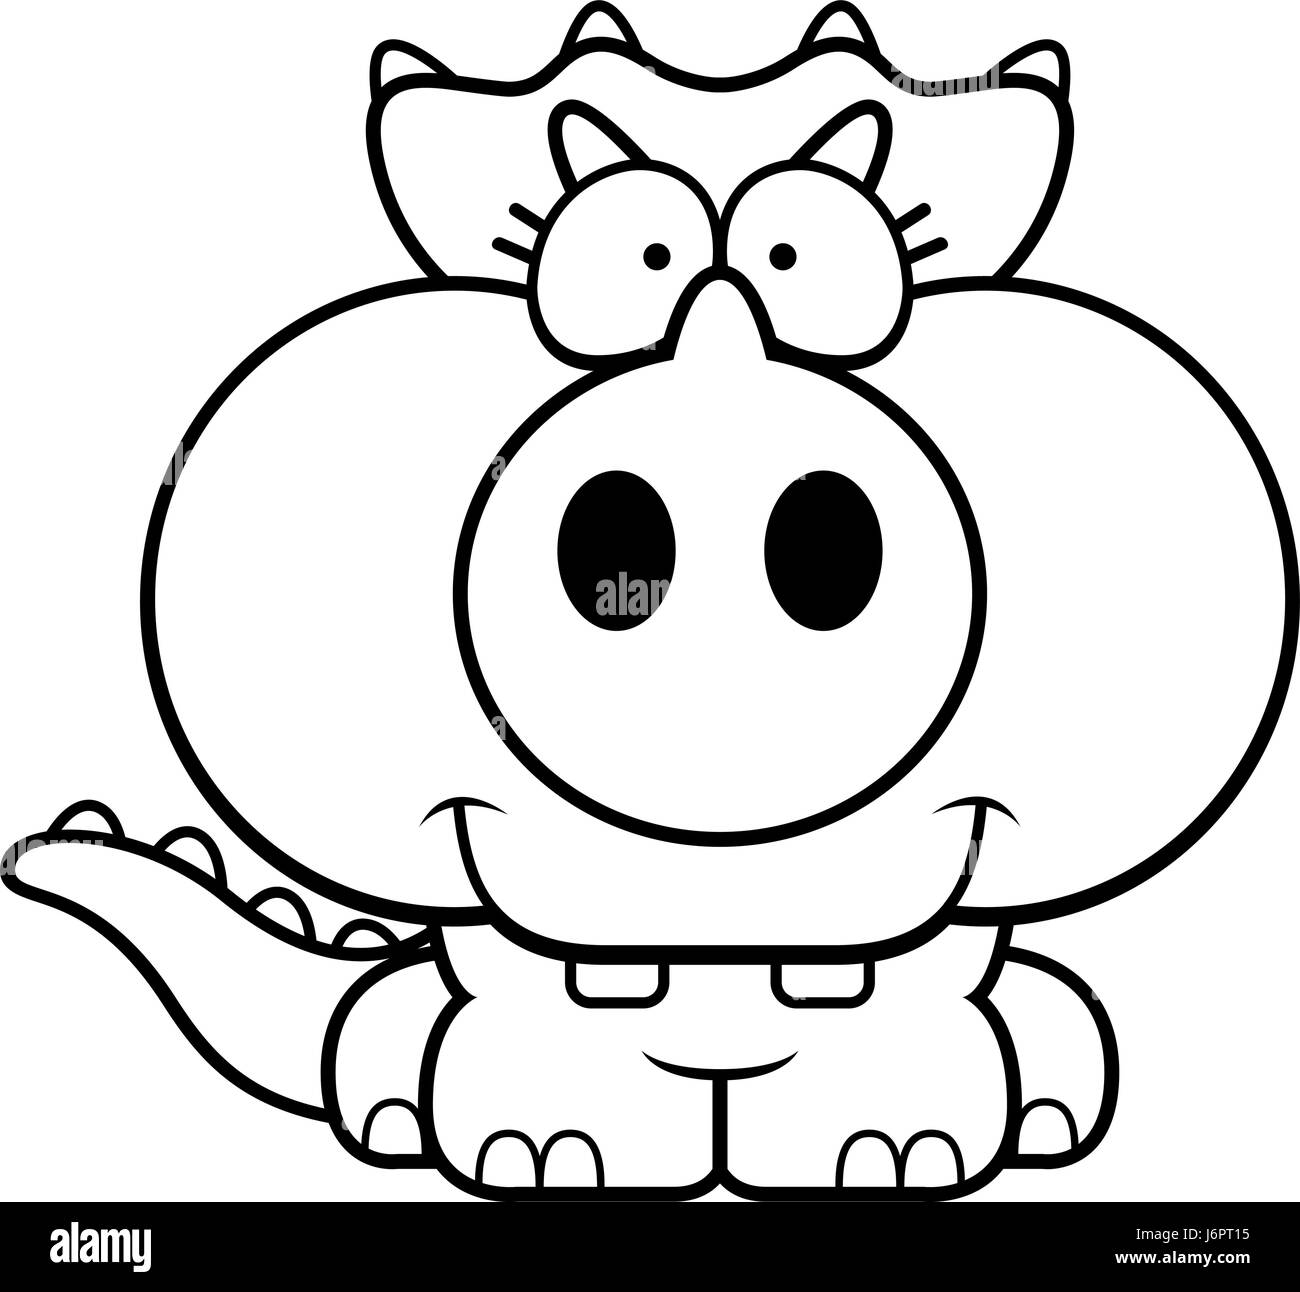 A cartoon illustration of a little Triceratops dinosaur happy and smiling. Stock Vector